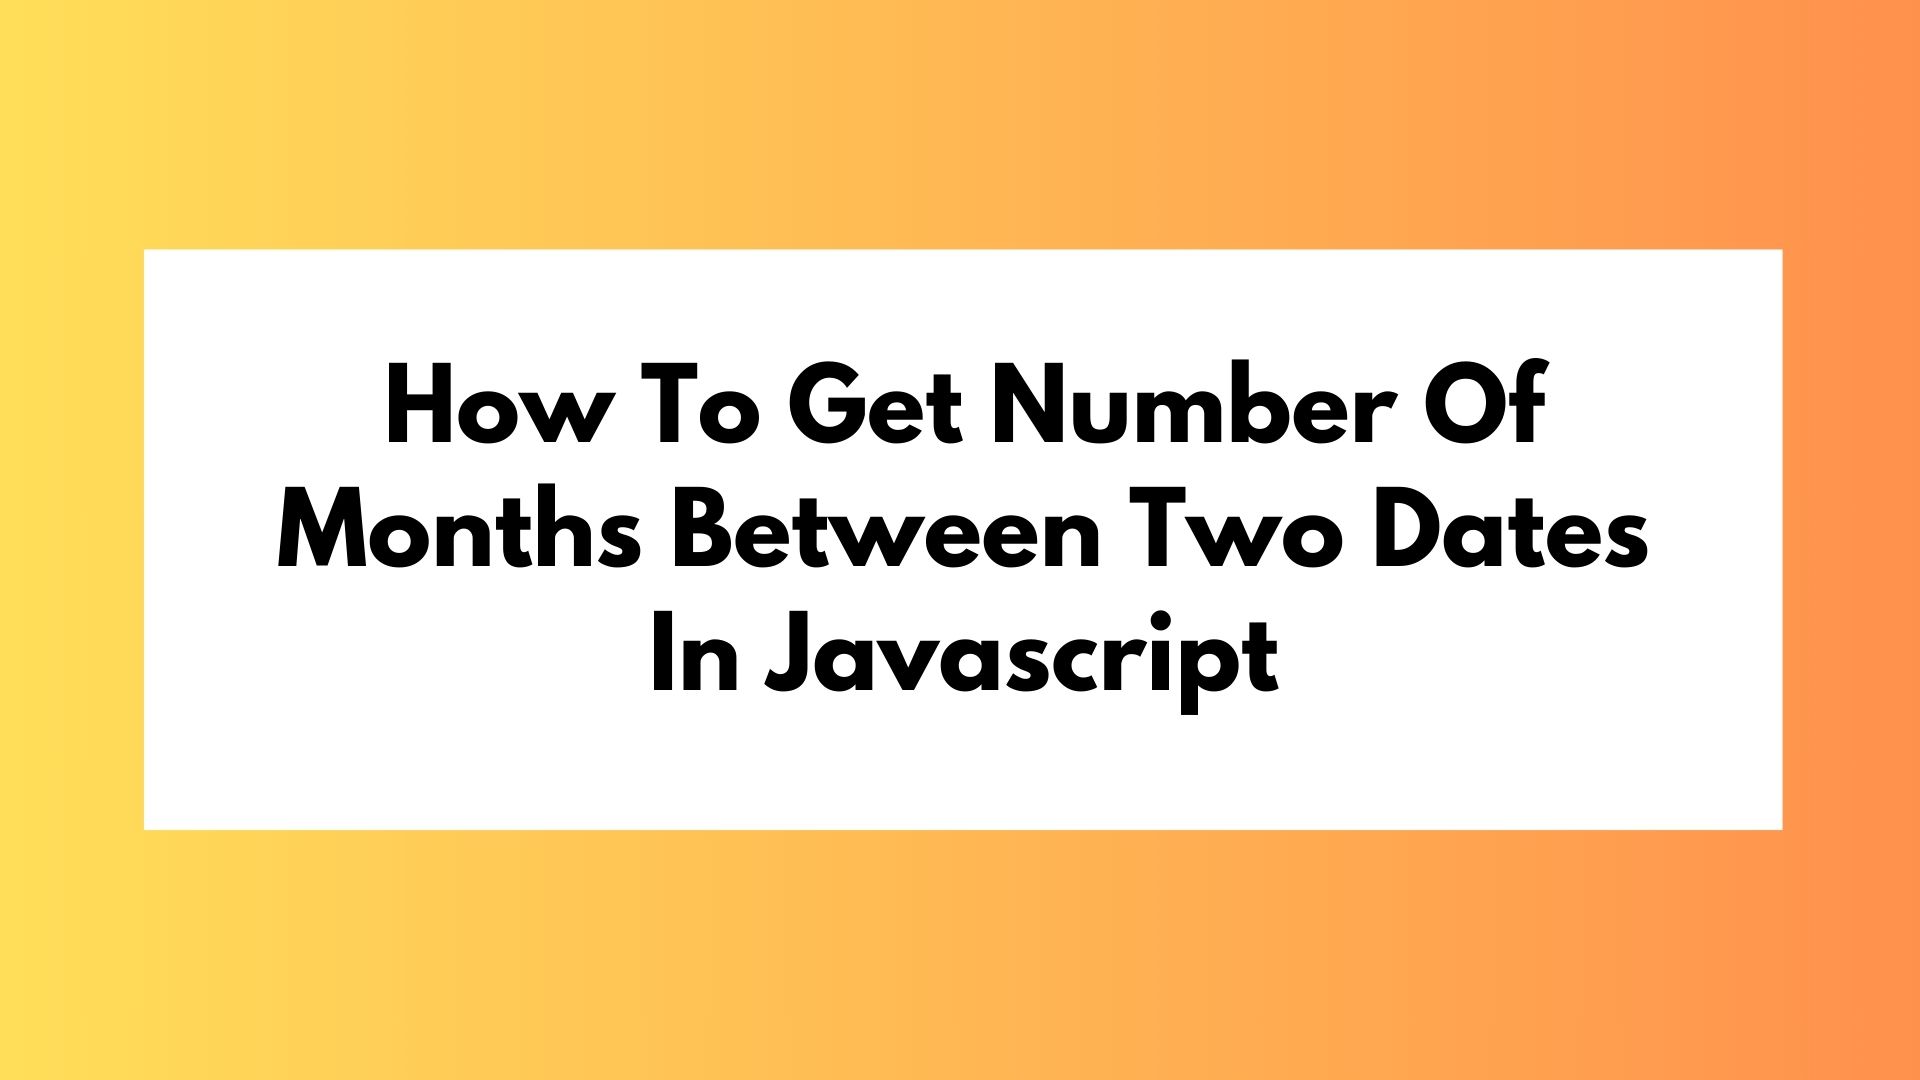 How To Get Number Of Months Between Two Dates In Javascript